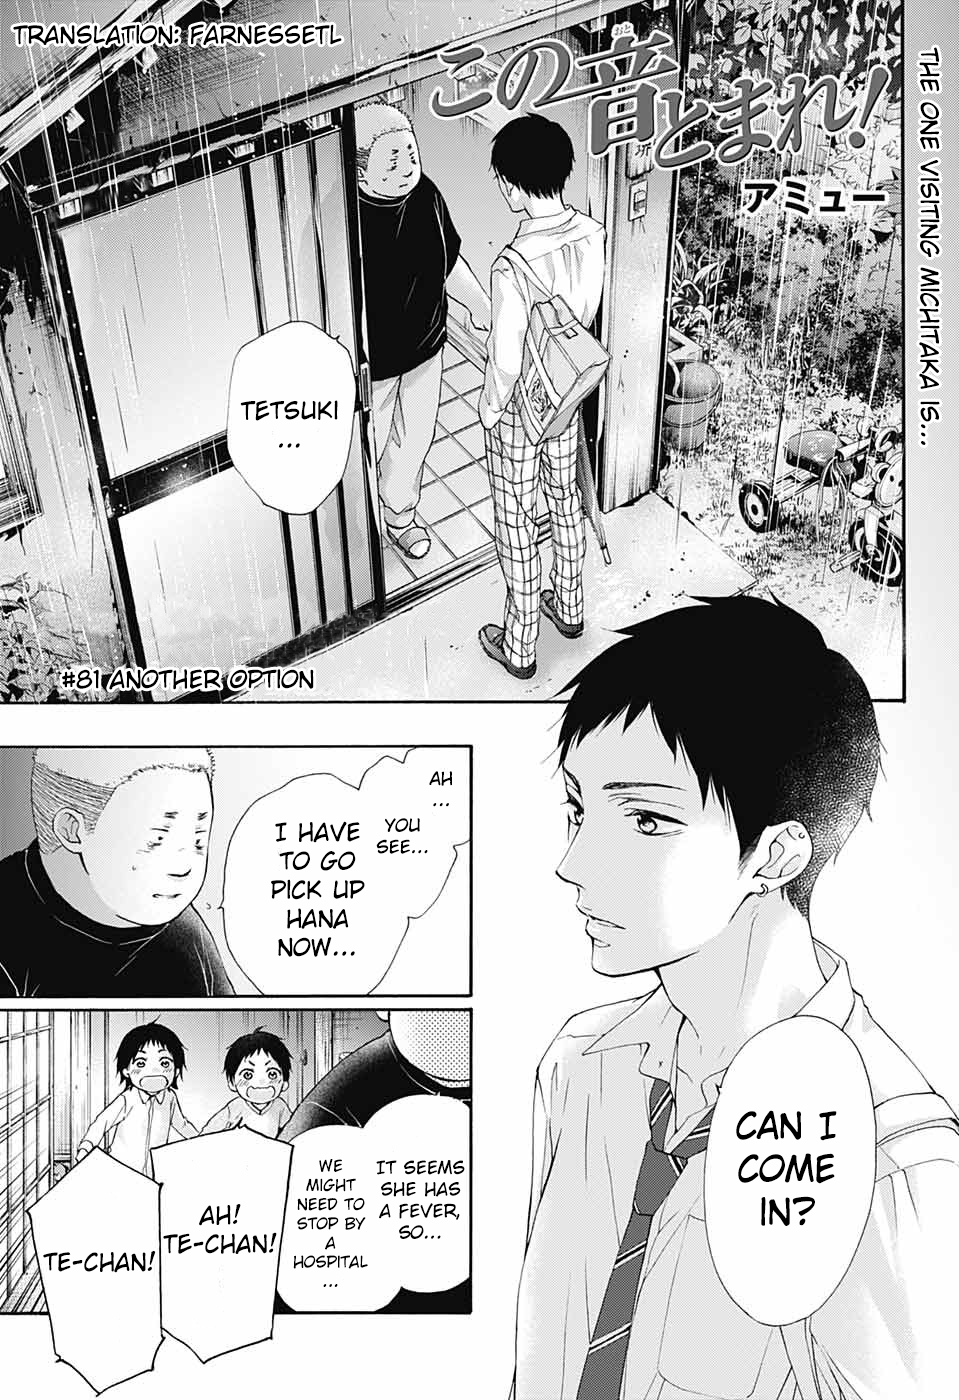 Kono Oto Tomare! Vol.21 Chapter 81: Another Option - Picture 1